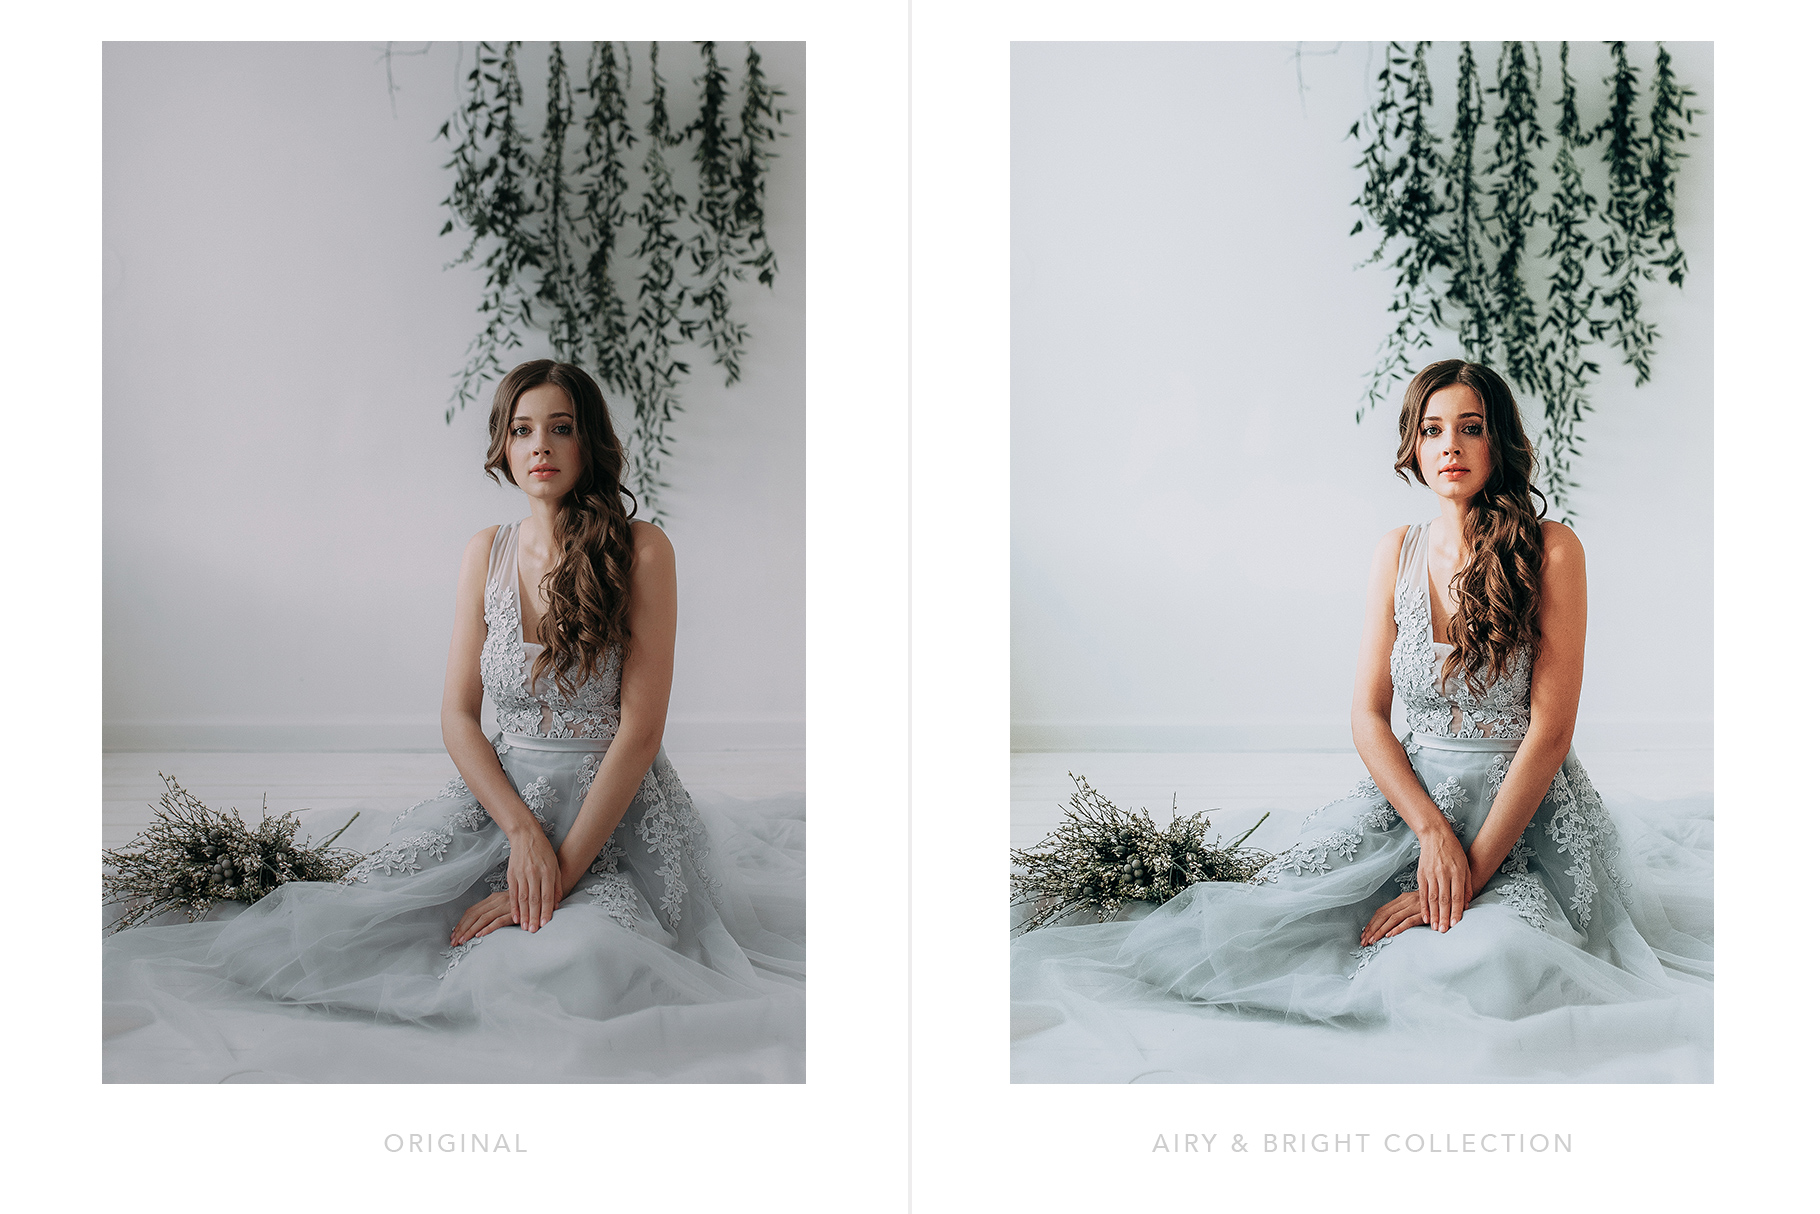 Bright-and-Airy-presets-lightroom.jpg